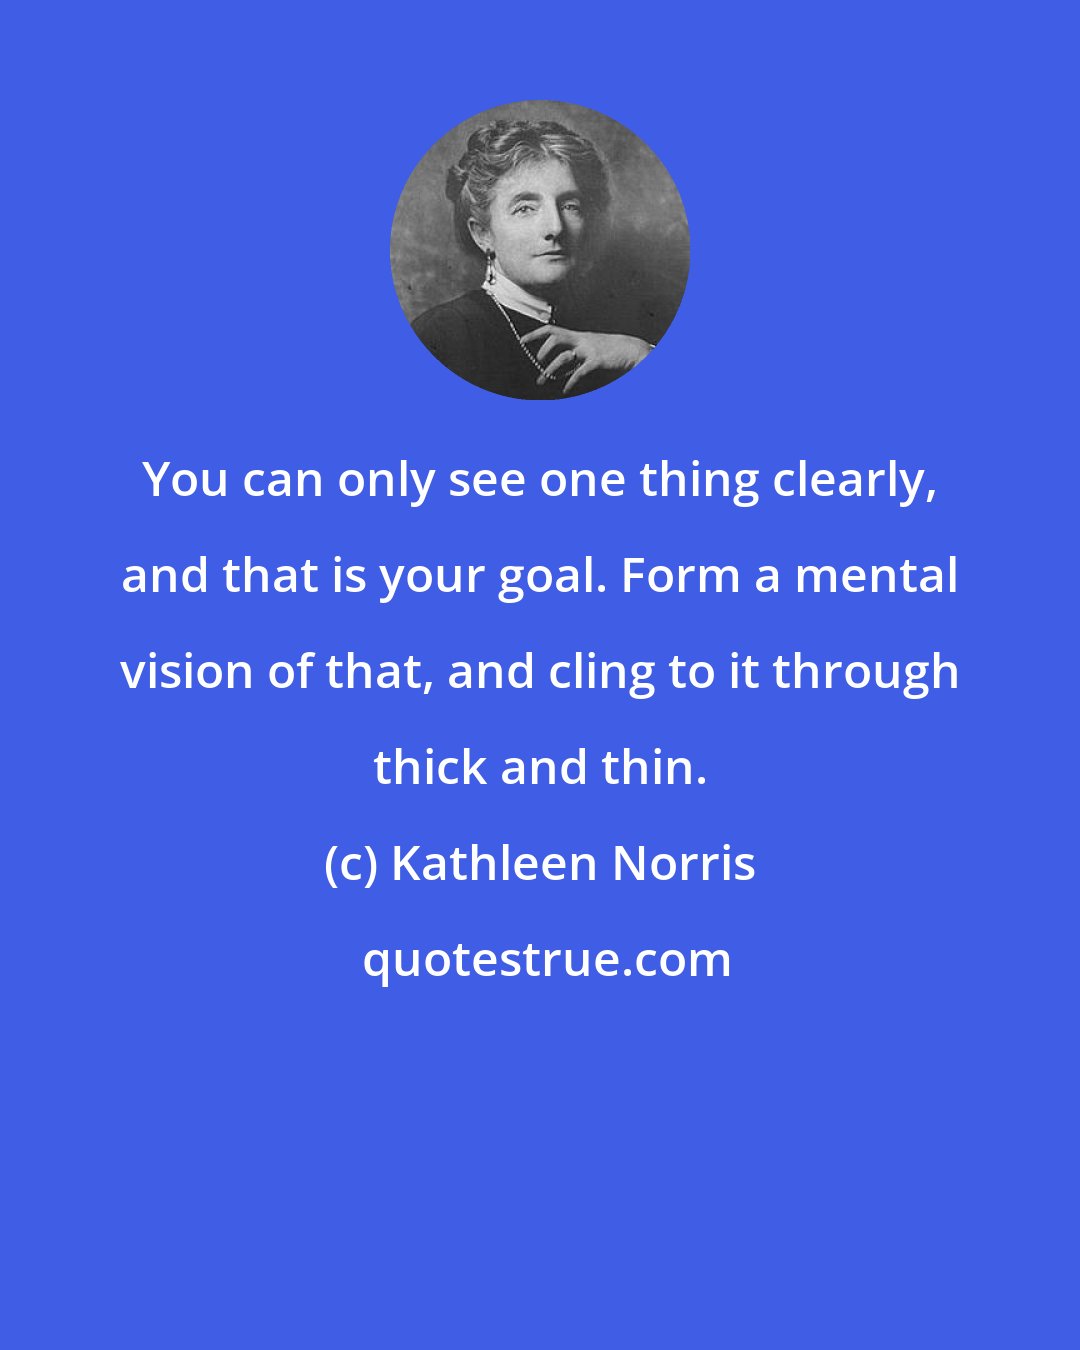 Kathleen Norris: You can only see one thing clearly, and that is your goal. Form a mental vision of that, and cling to it through thick and thin.